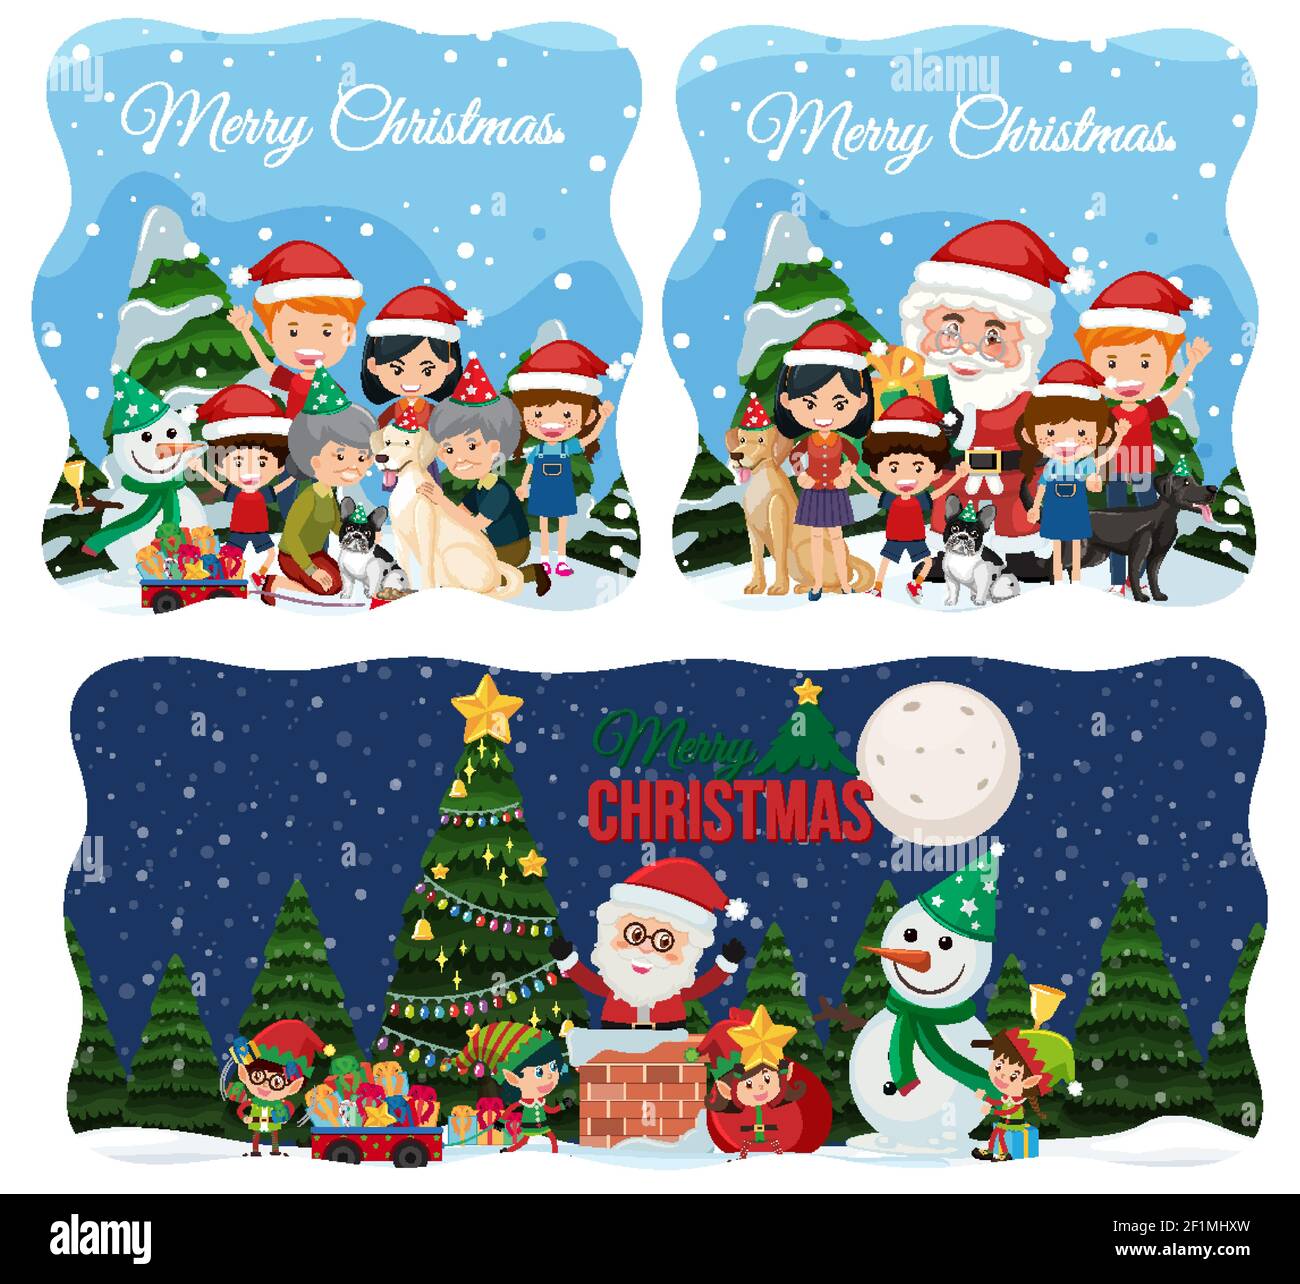 Set of different Merry Christmas scene with Santa Claus illustration Stock Vector